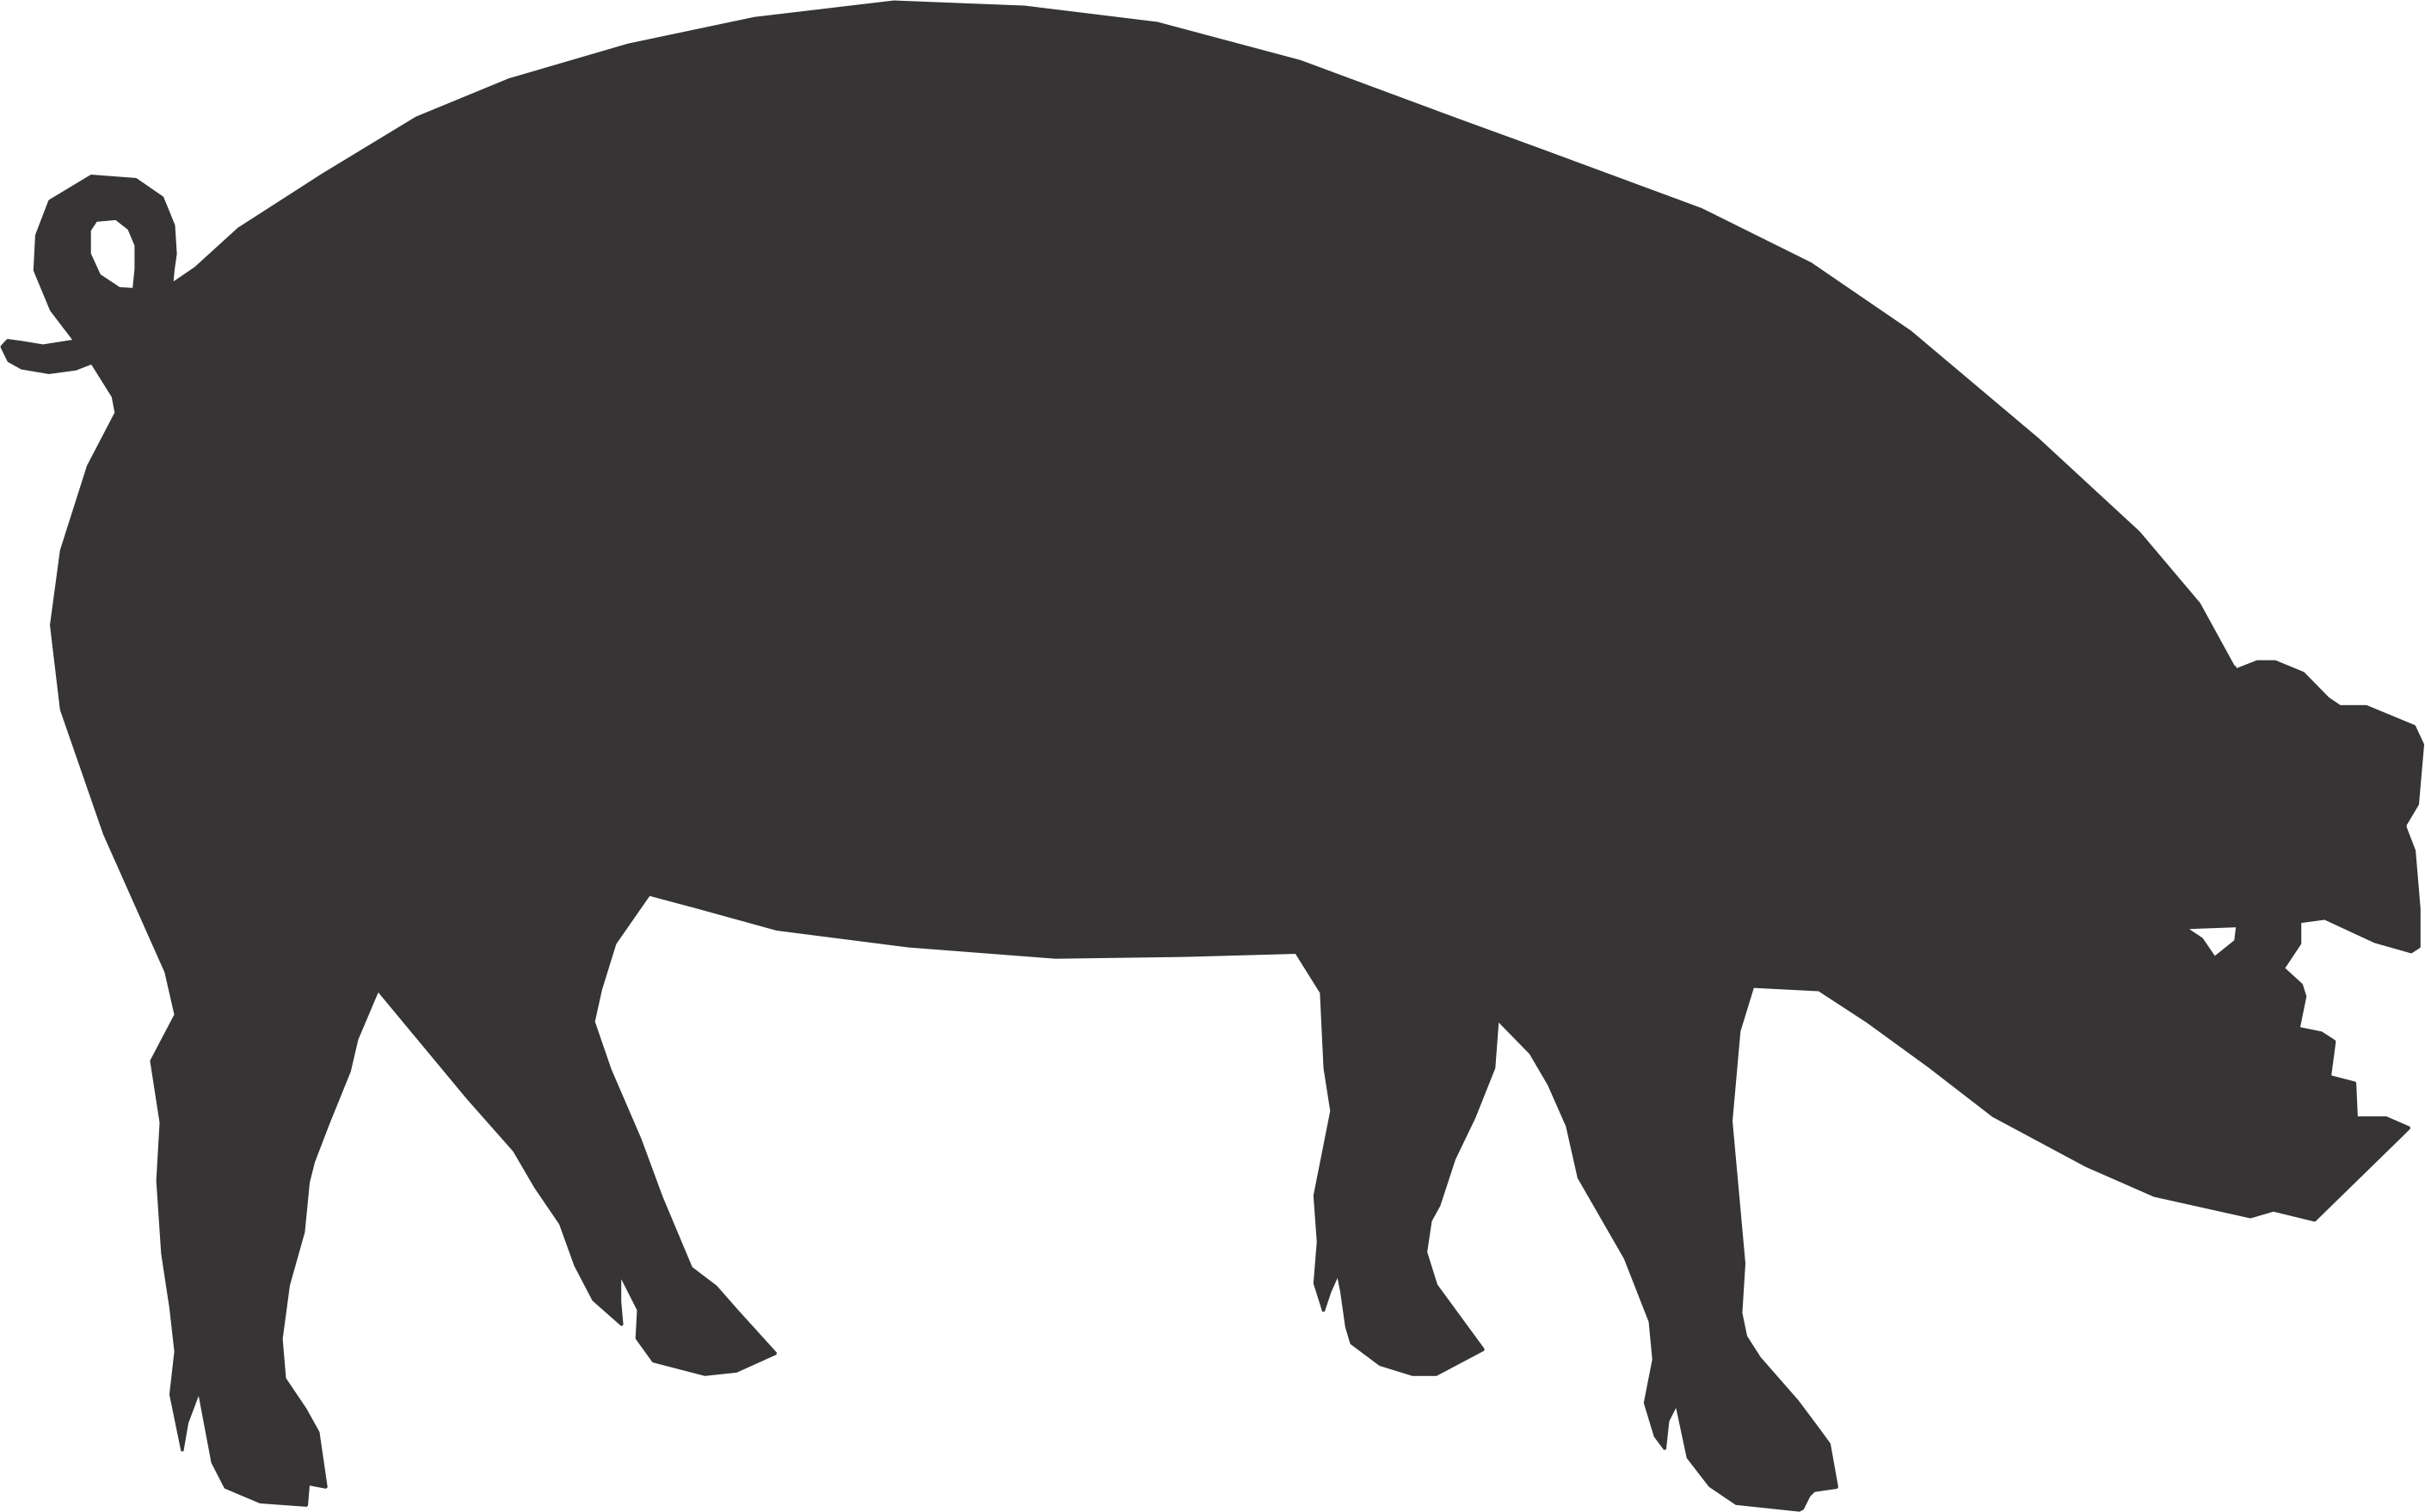 Pig Silhouette Clipart Best